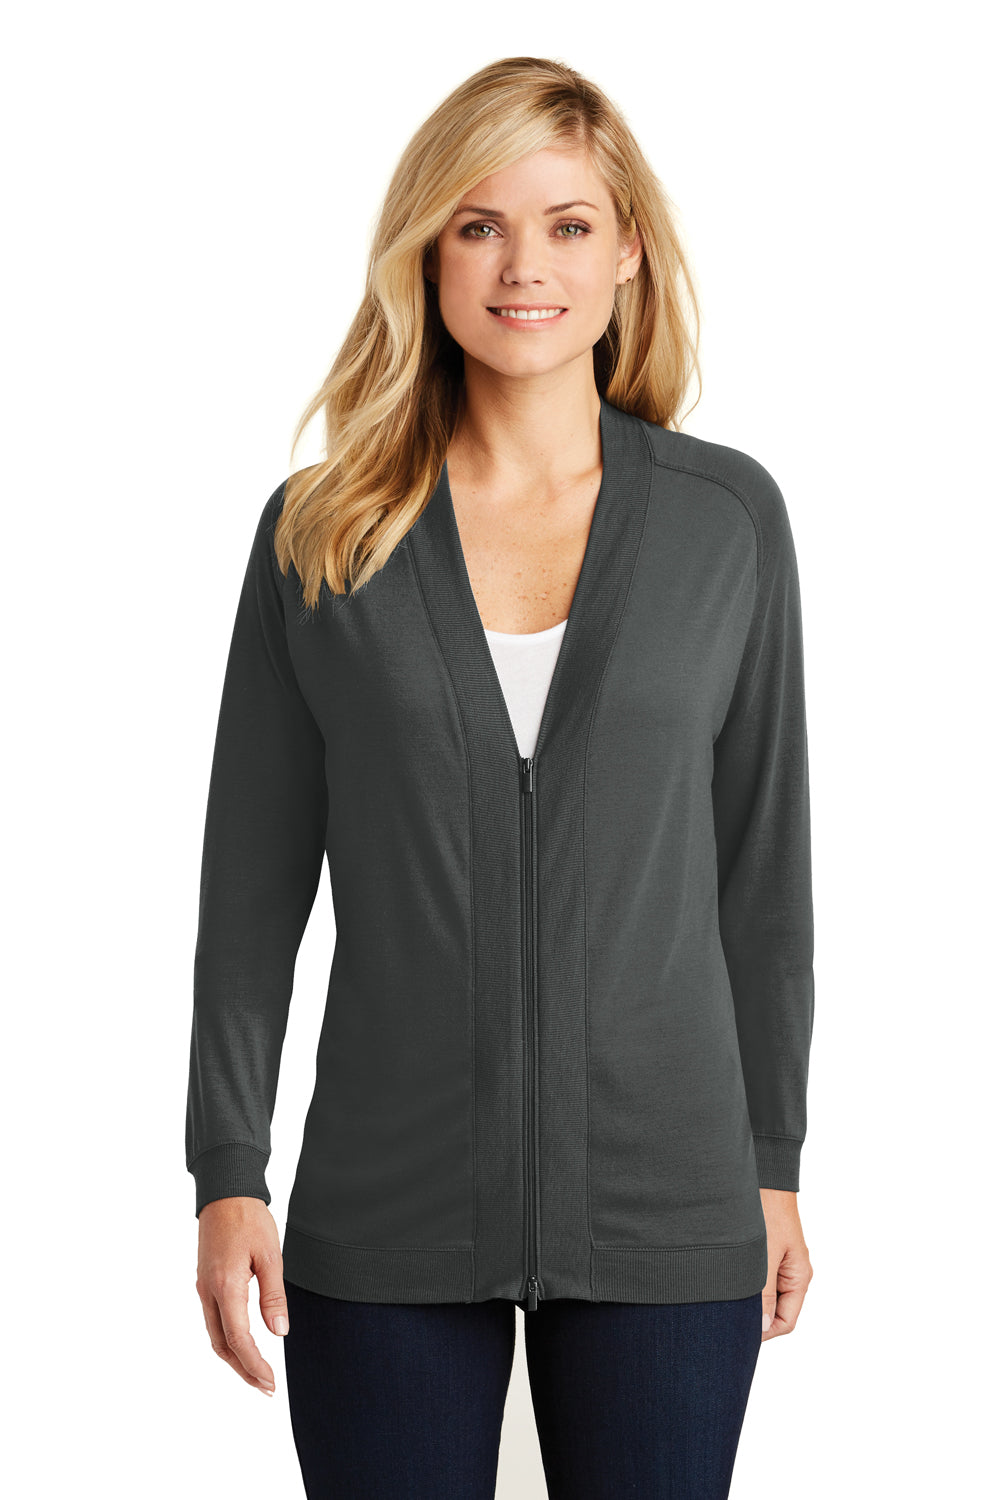 Port Authority LK5431 Womens Concept Bomber Long Sleeve Cardigan Sweater Smoke Grey Front